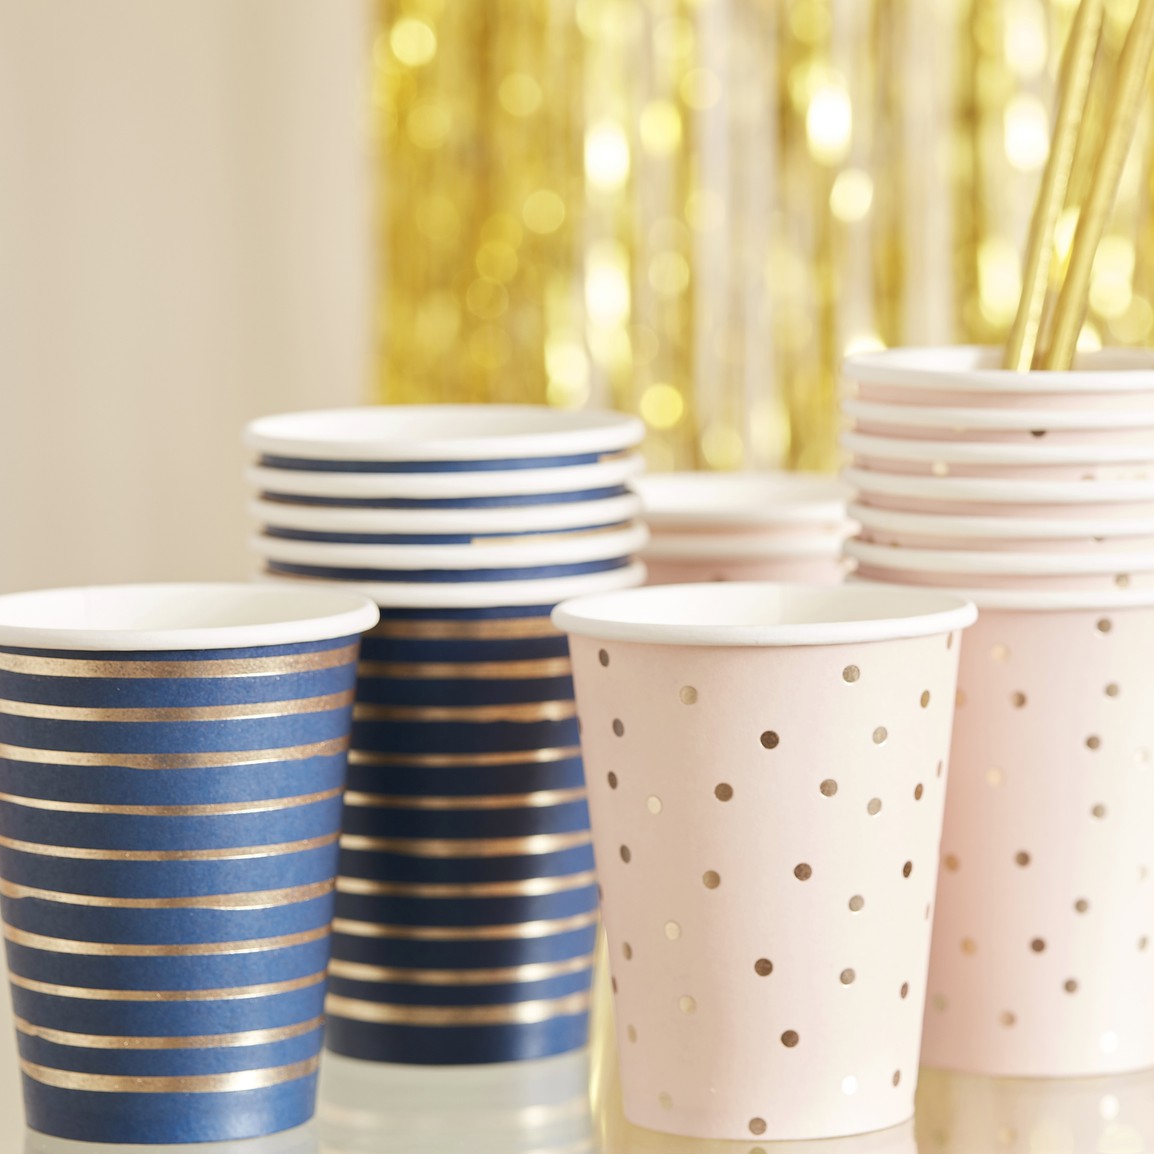 GOLD FOILED PINK & NAVY PAPER CUPS PK8